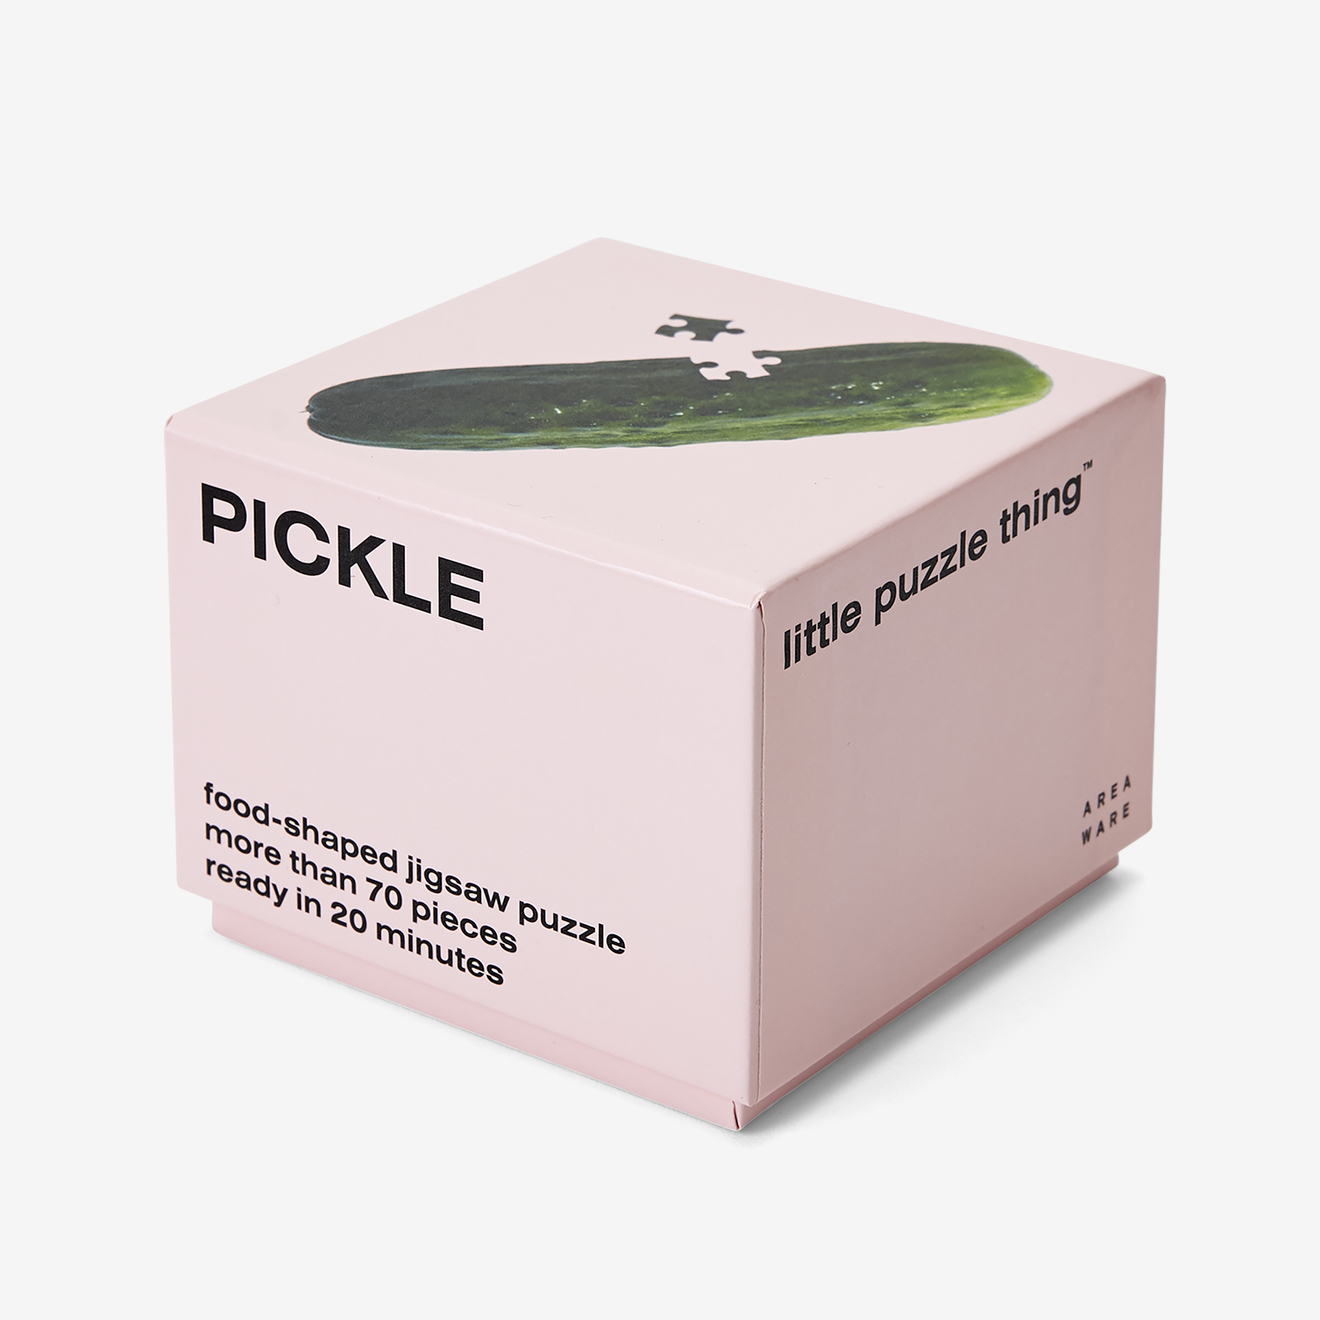 areaware food-shaped jigsaw puzzle pickle